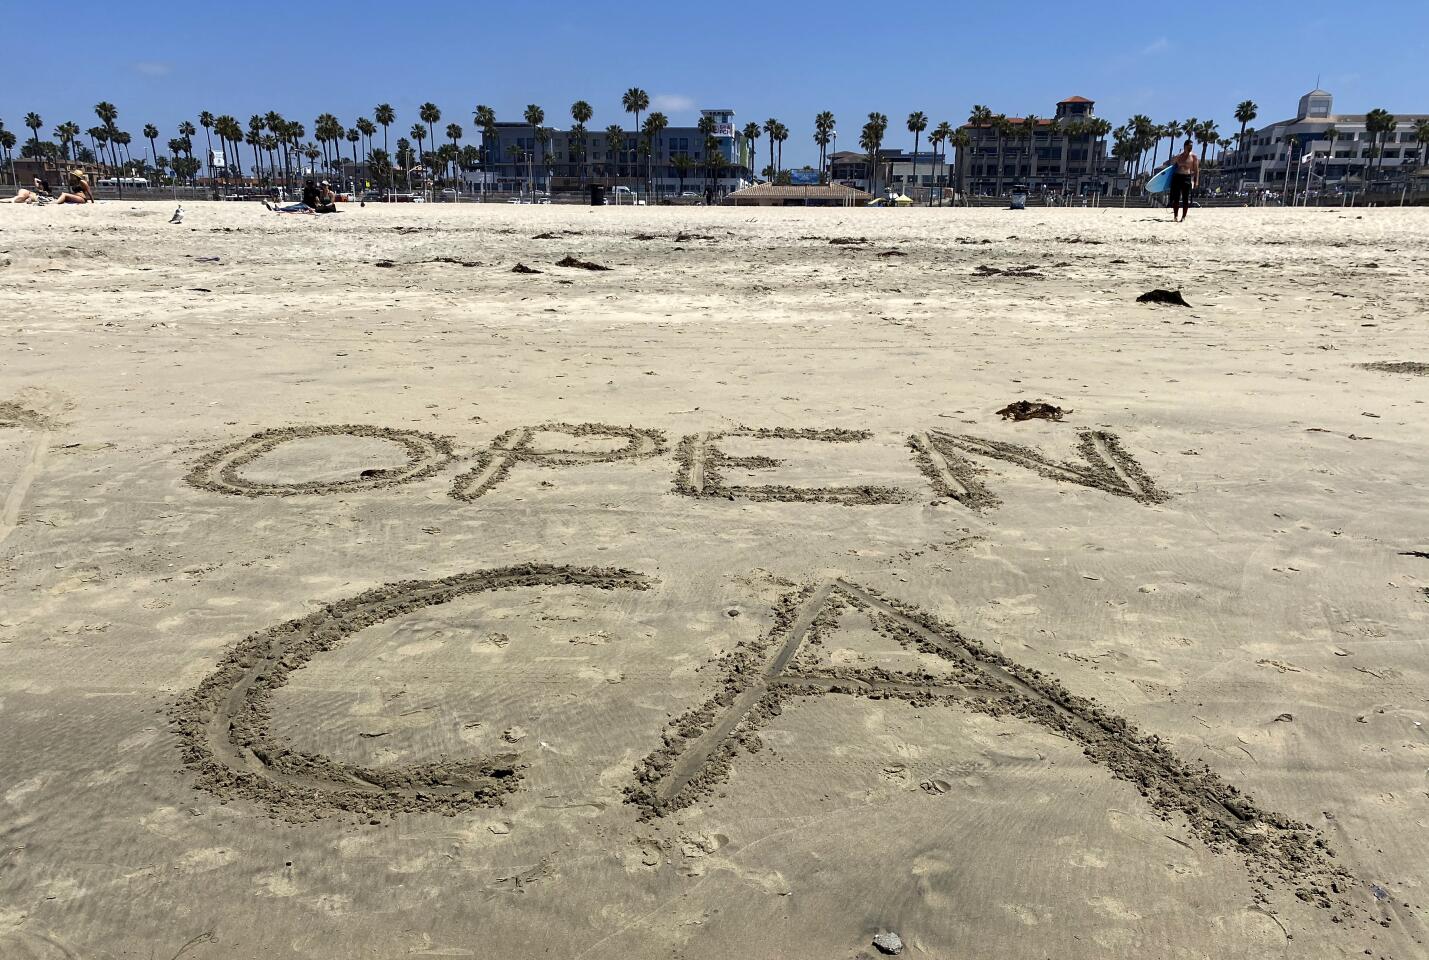 Someone wrote "OPEN CA" on the sand just before the protest in Huntington Beach on Friday.